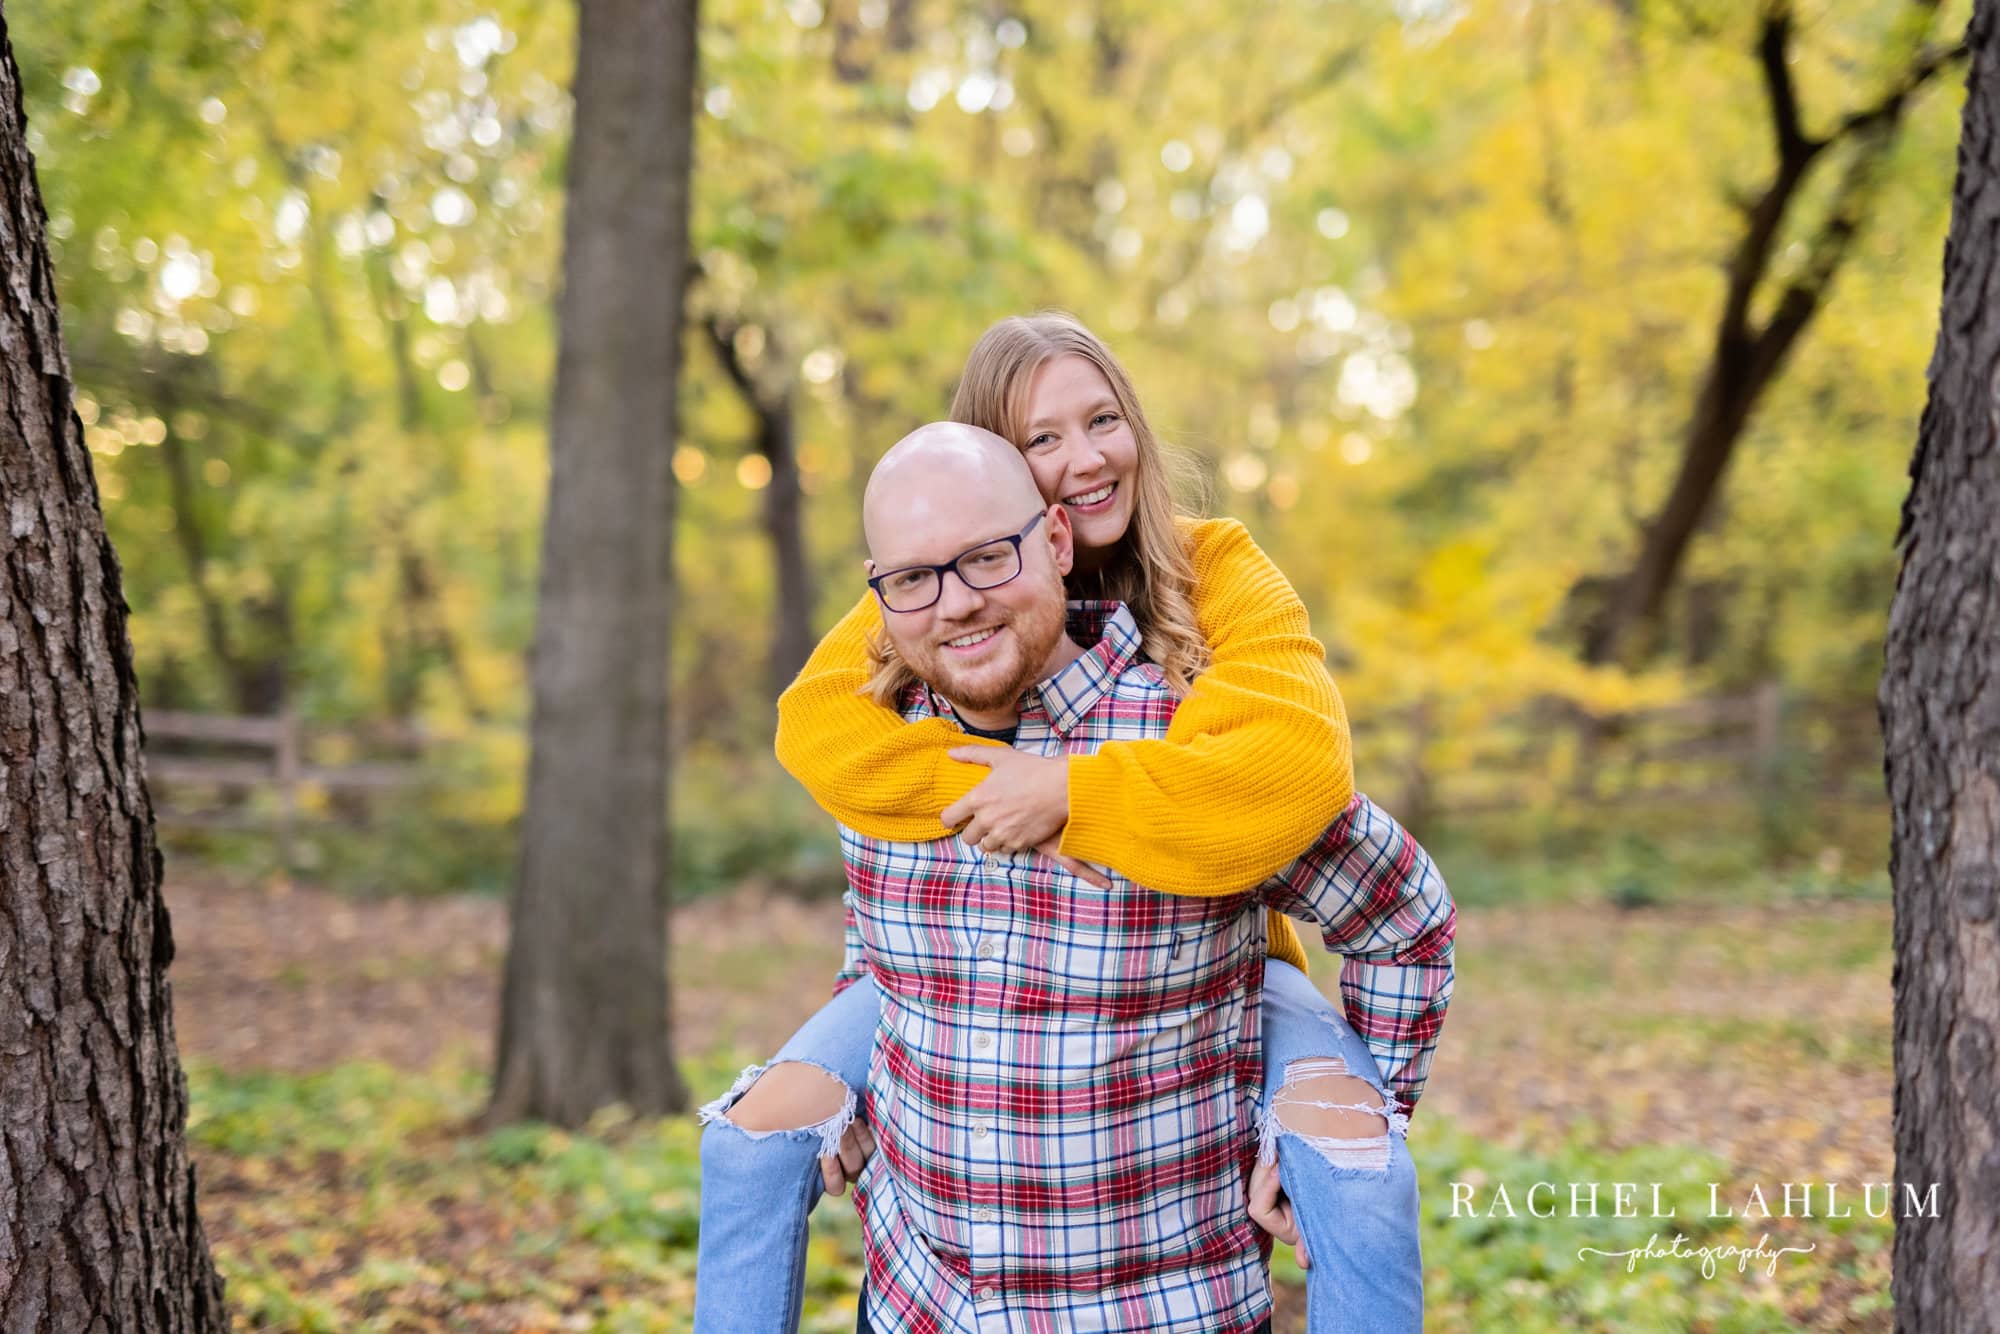 Man gives fiancée a piggy-back ride during engagement photo shoot at Lyndale Rose Gardens.